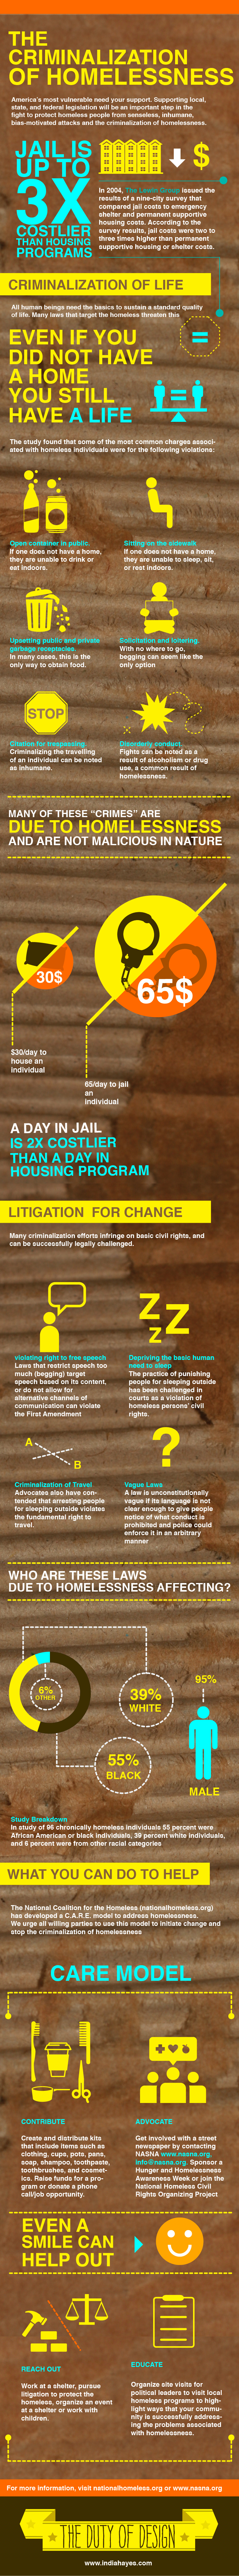 criminalization-of-homelessness-infographic_50d333f034fe4